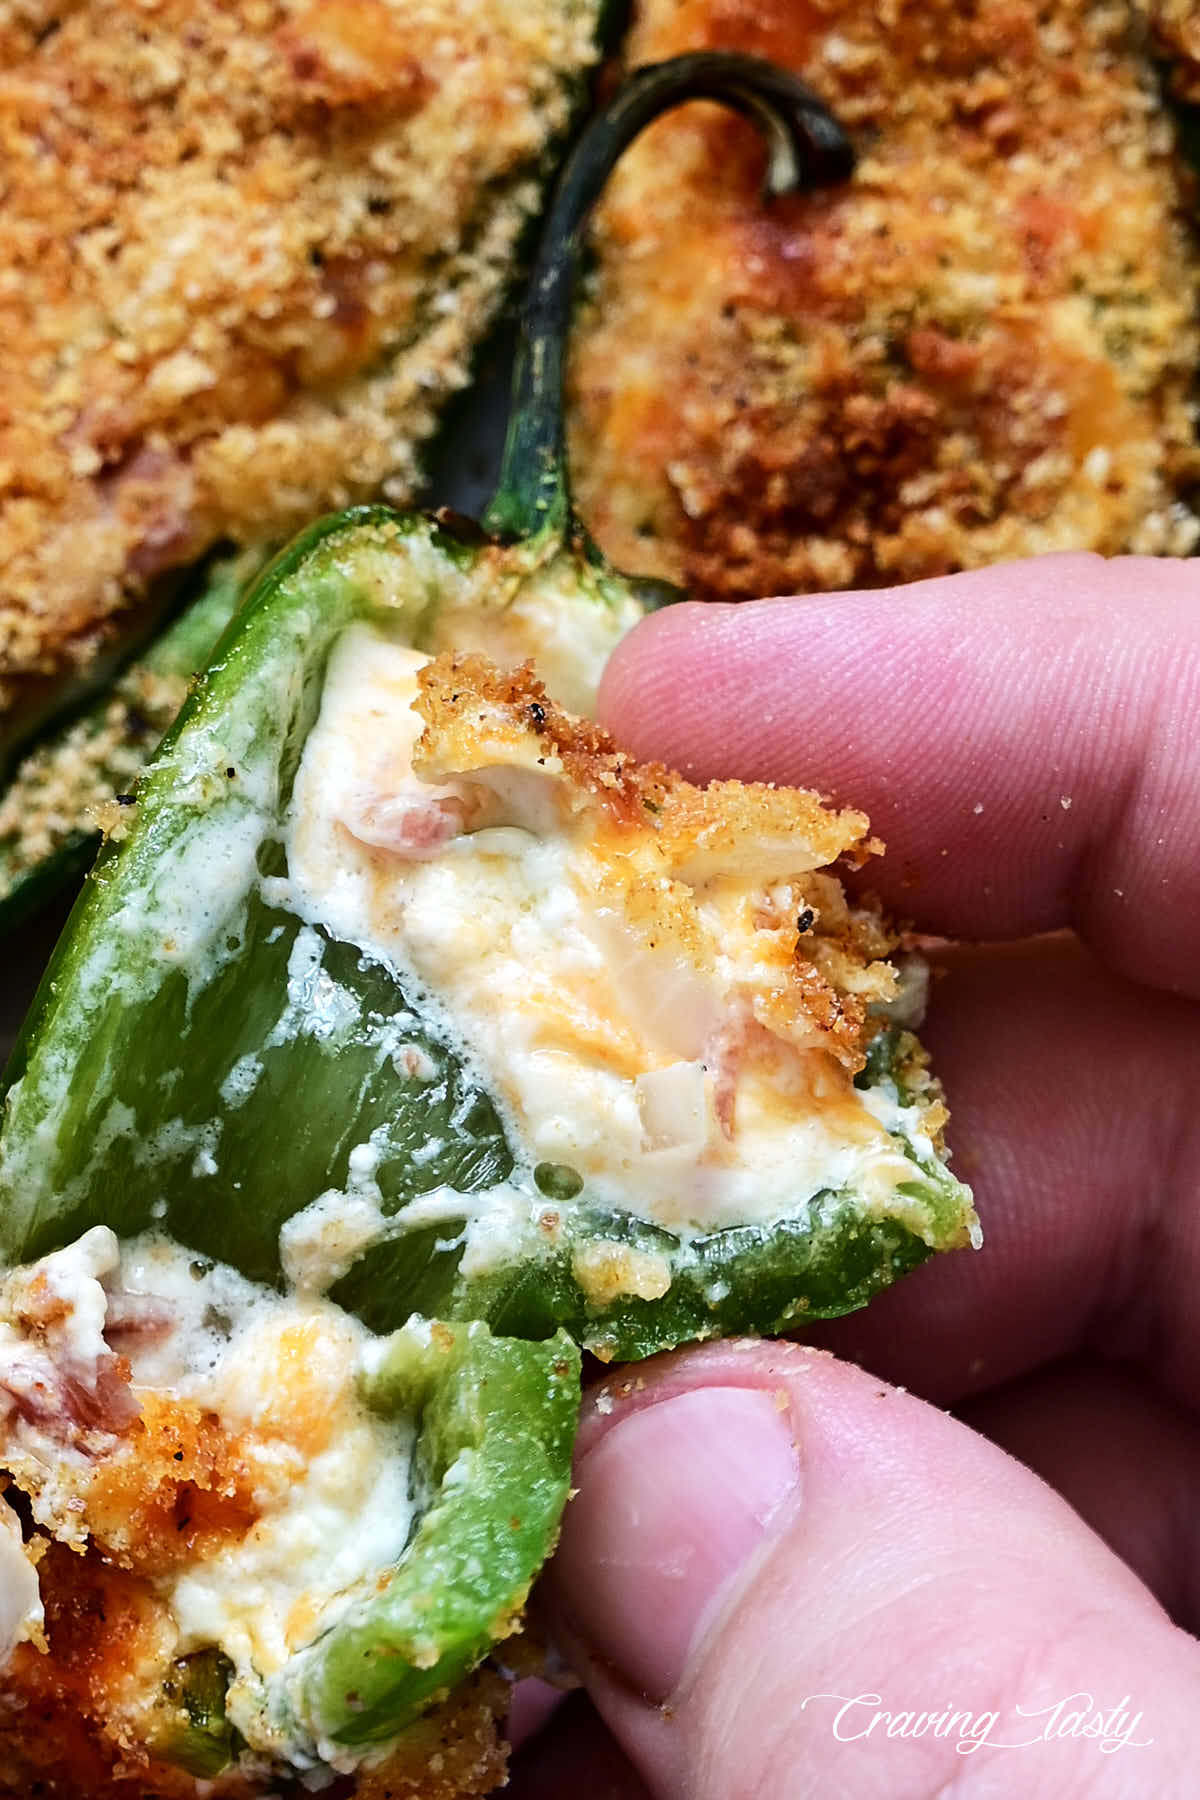 A close up of a jalapeno popper cut in half showing gooey cheese filling.